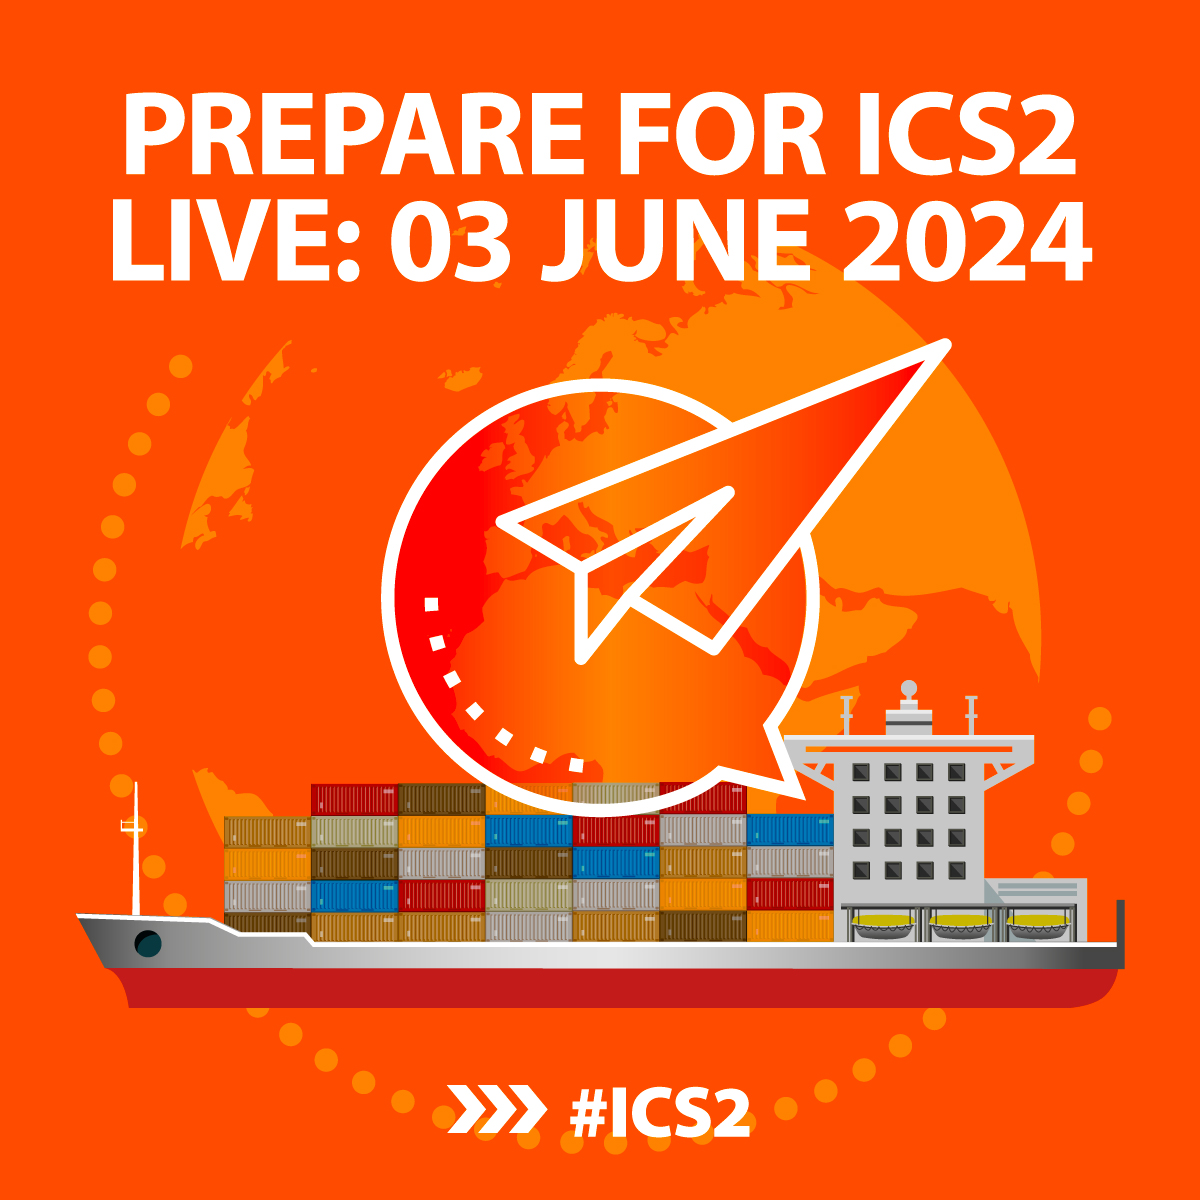 🚢 Attention maritime & inland waterway carriers! The #ICS2 launch on 3 June 2024 is approaching. Make sure you are ready to start ENS filing by then. Not ready? Contact your Member State ASAP to request a Deployment Window. Our factsheet can help you👉 europa.eu/!XDV8qM